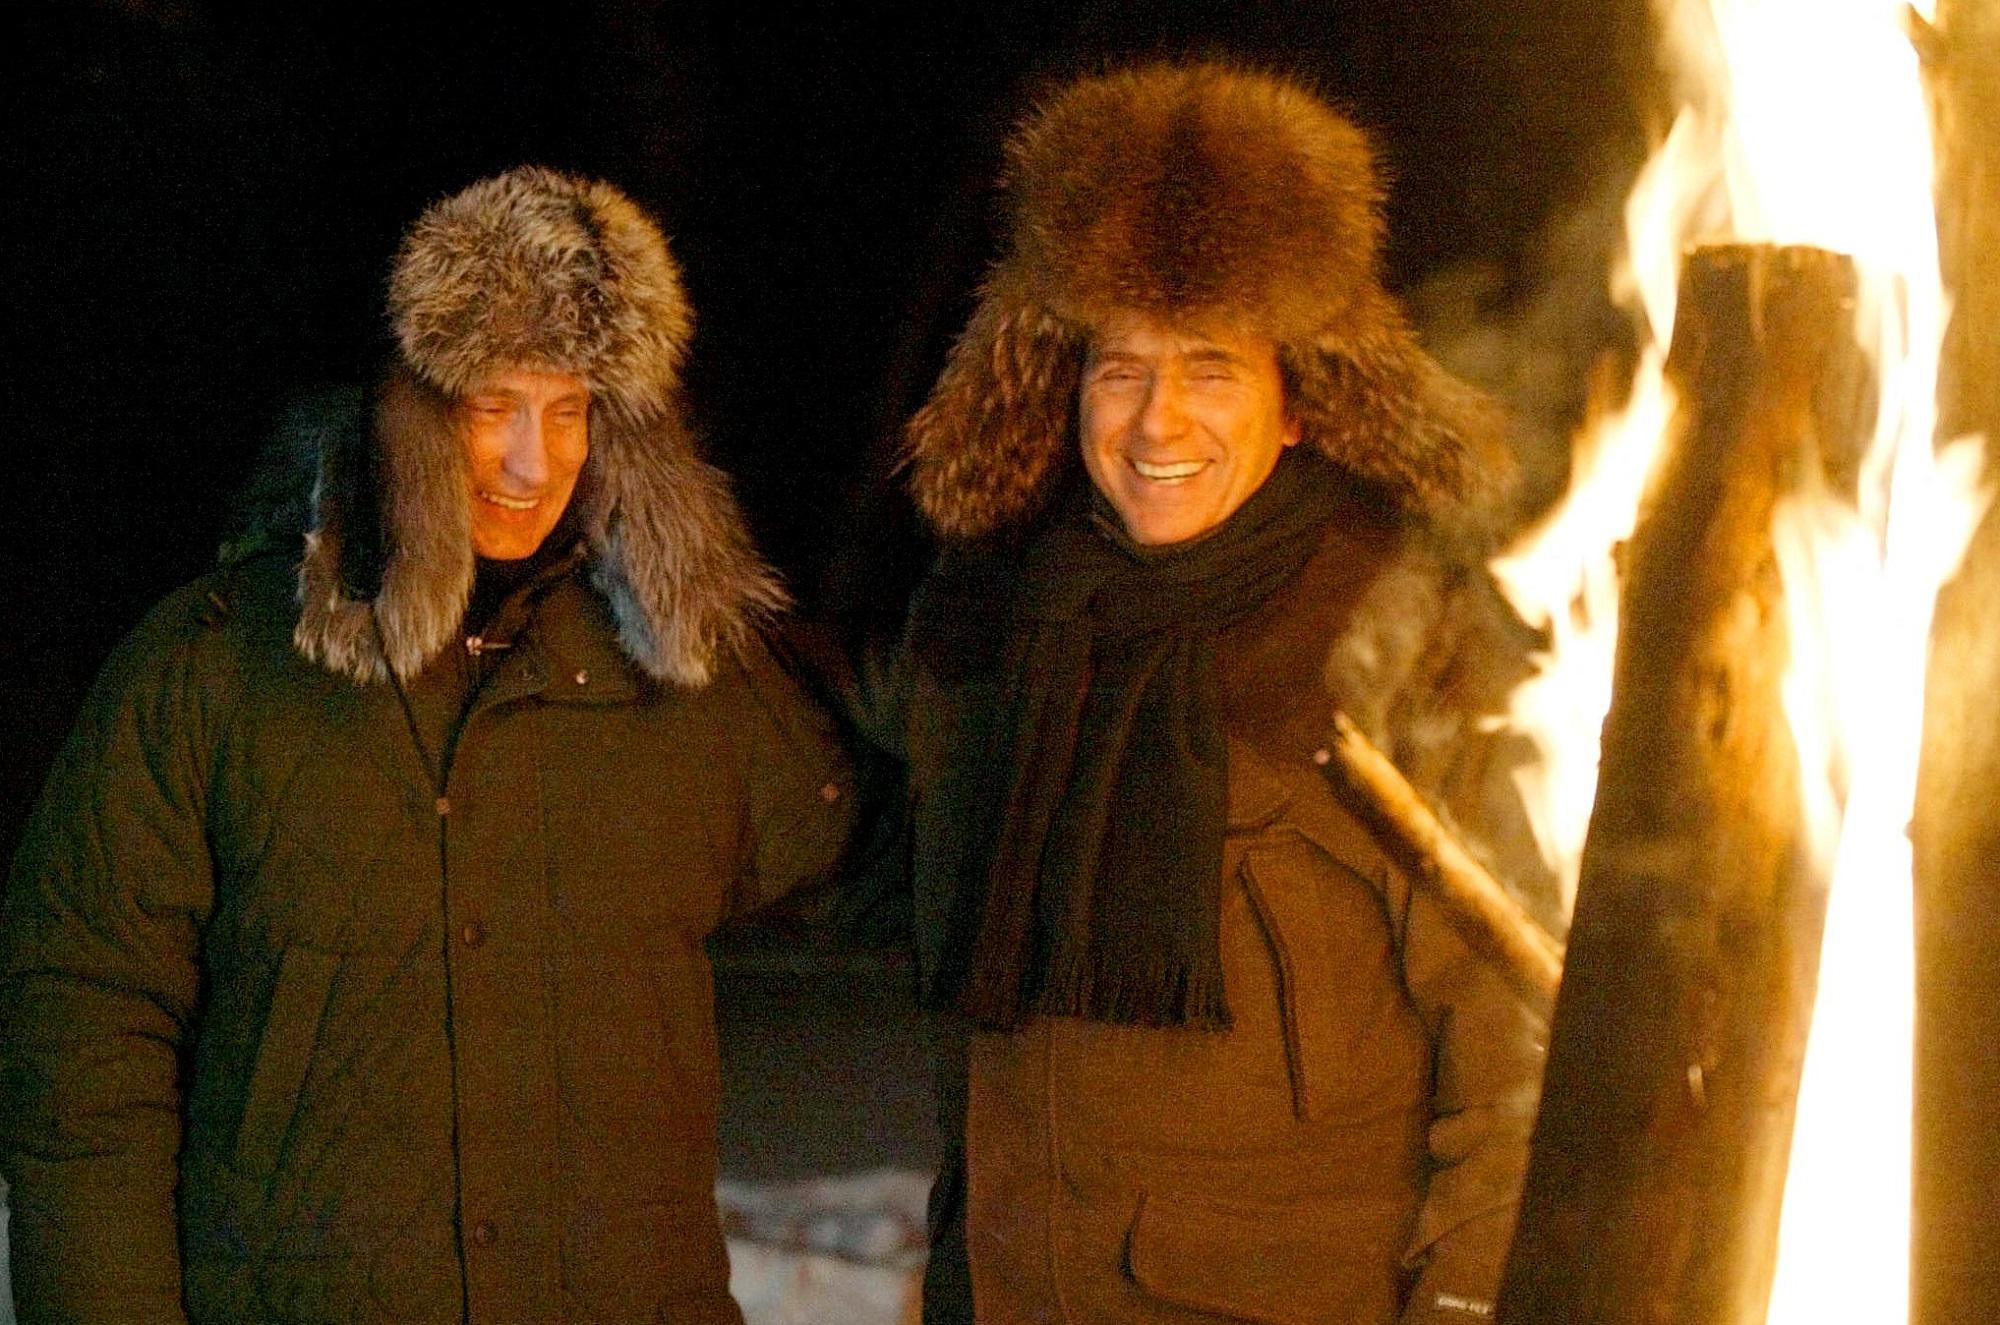 A thrilling tale: Berlusconi goes hunting with Putin and pursues roe deer